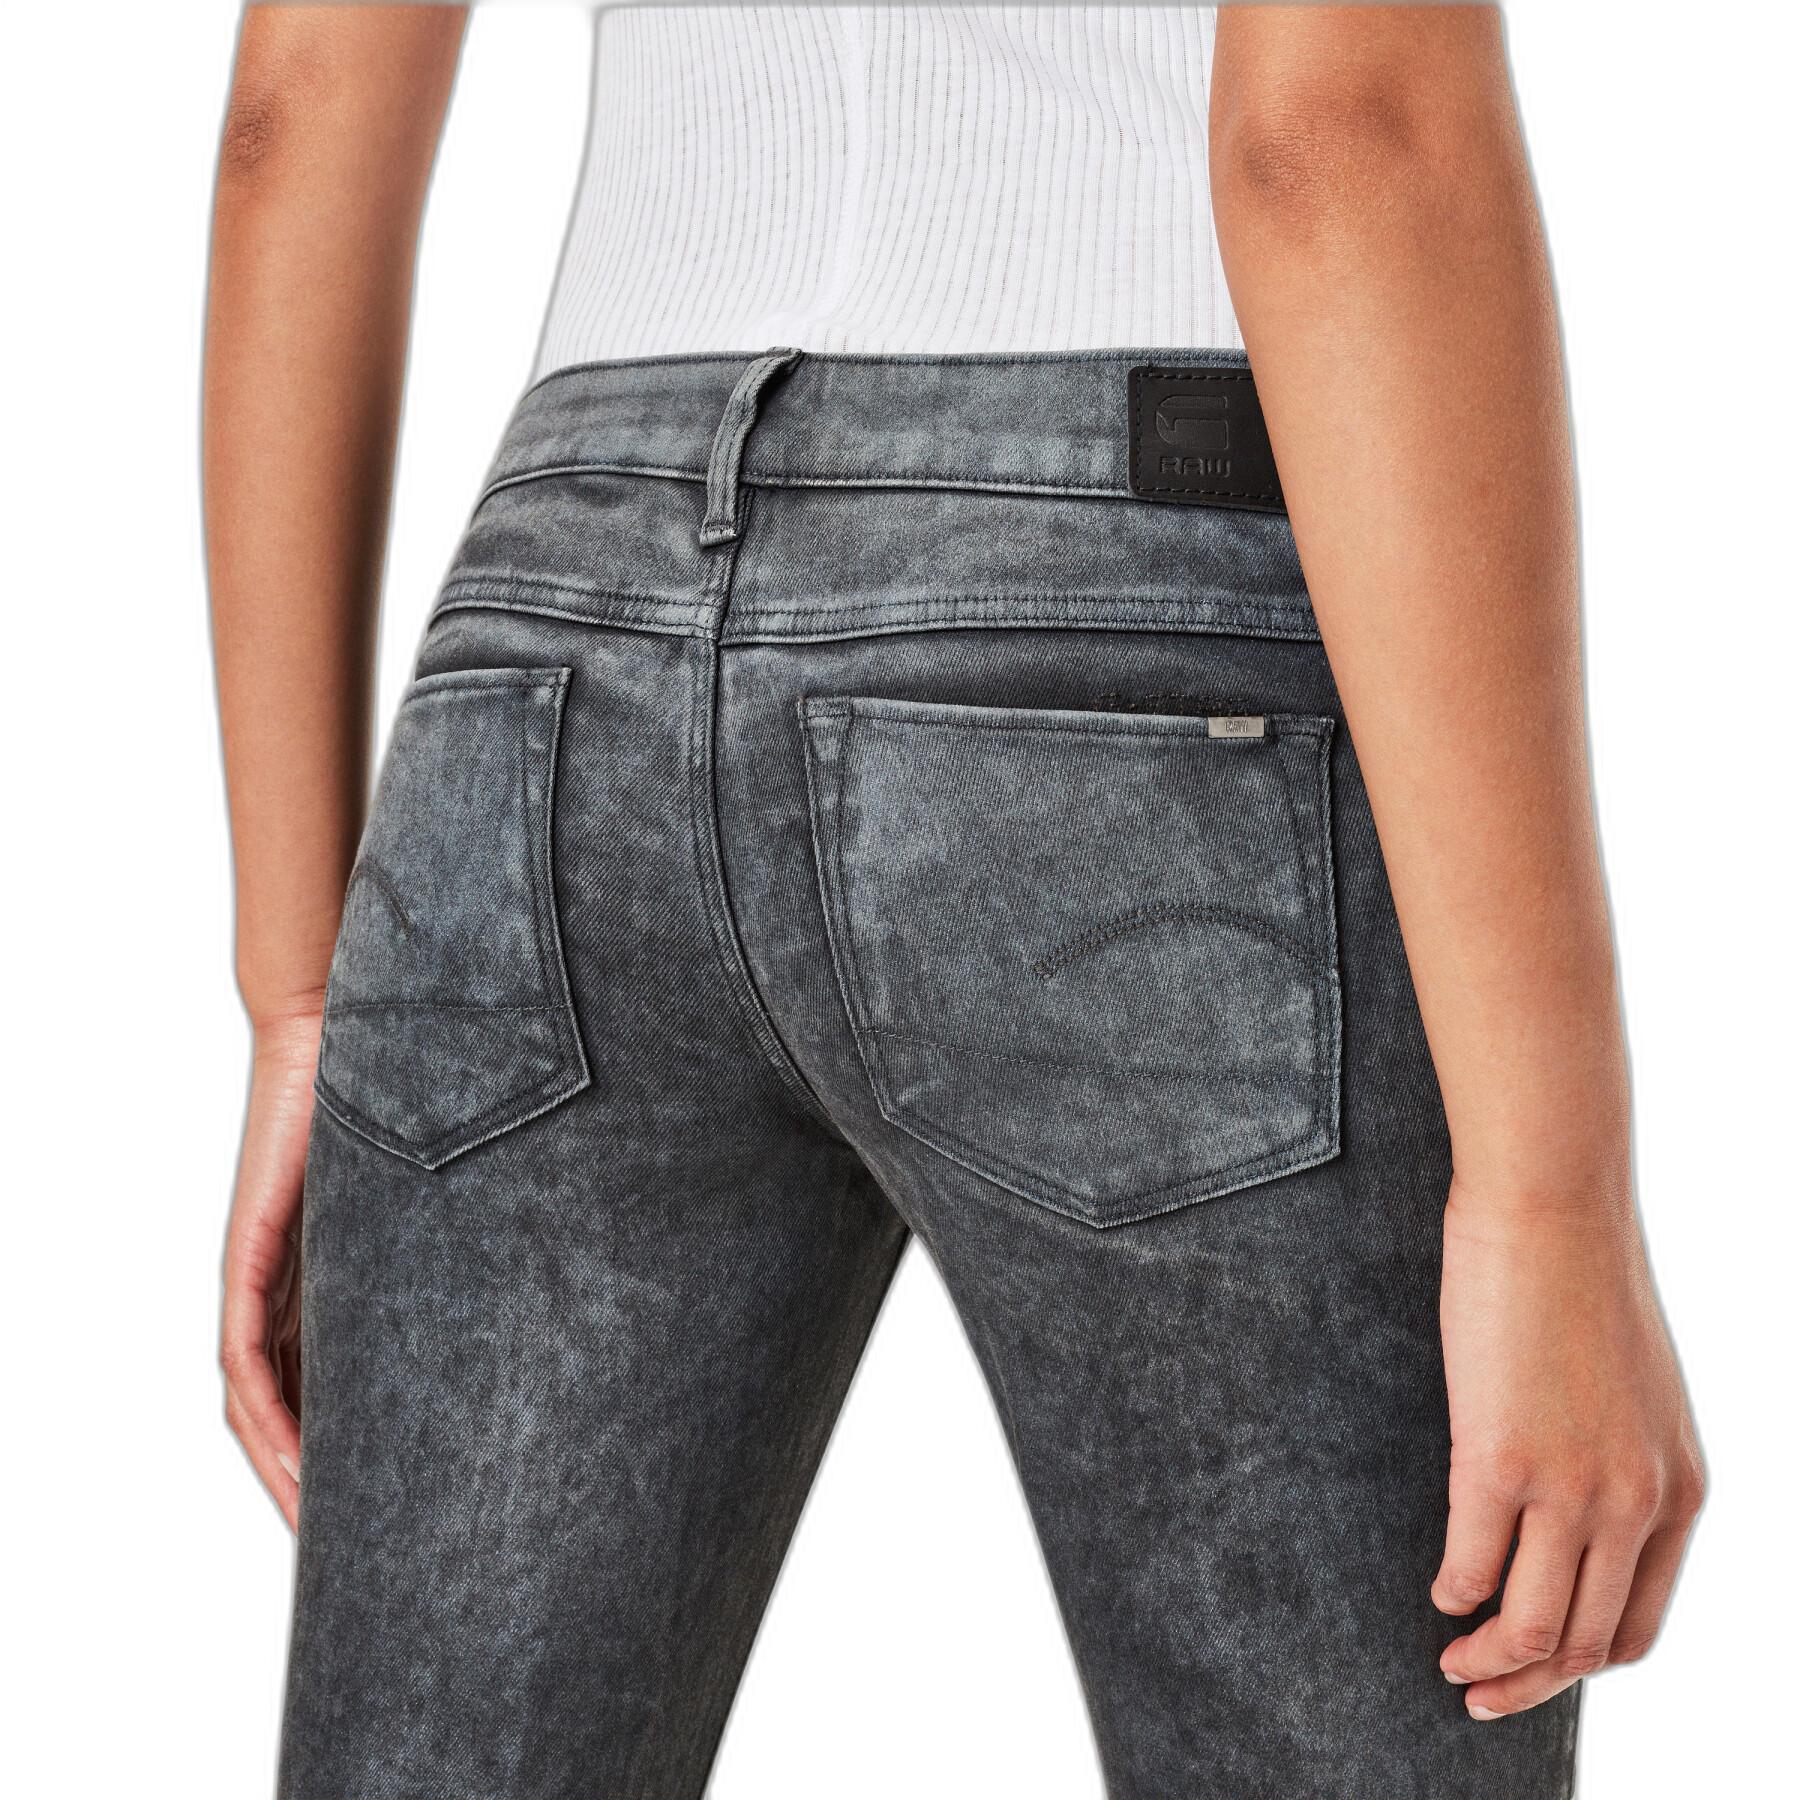 Jeans taille basse femme G-Star 3301